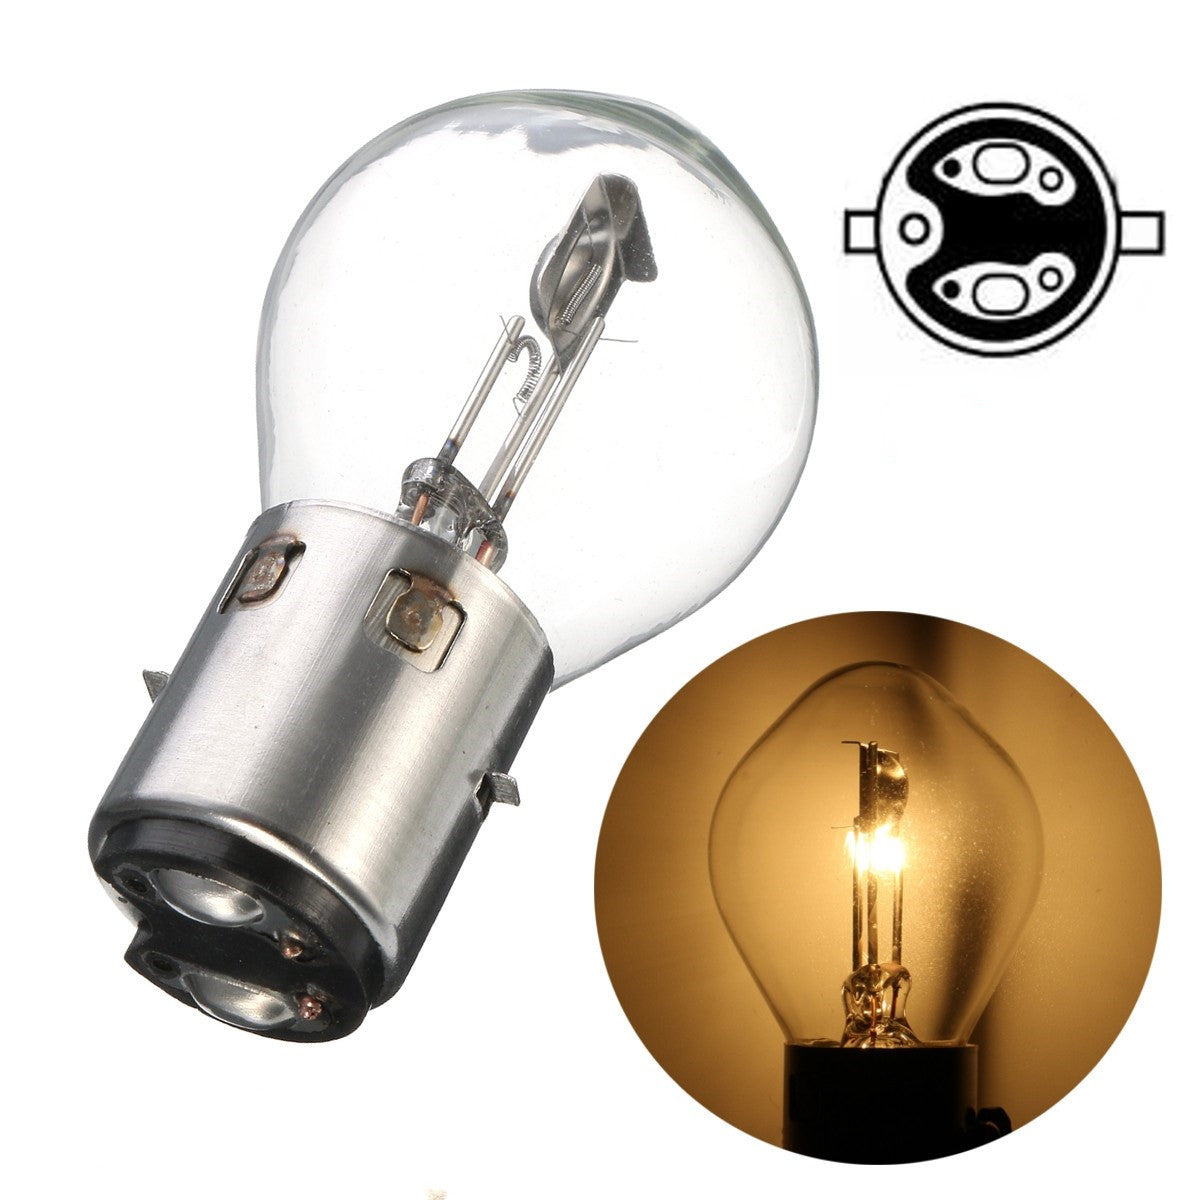 Sienna Motorcycle scooter headlight bulb (Transparent)